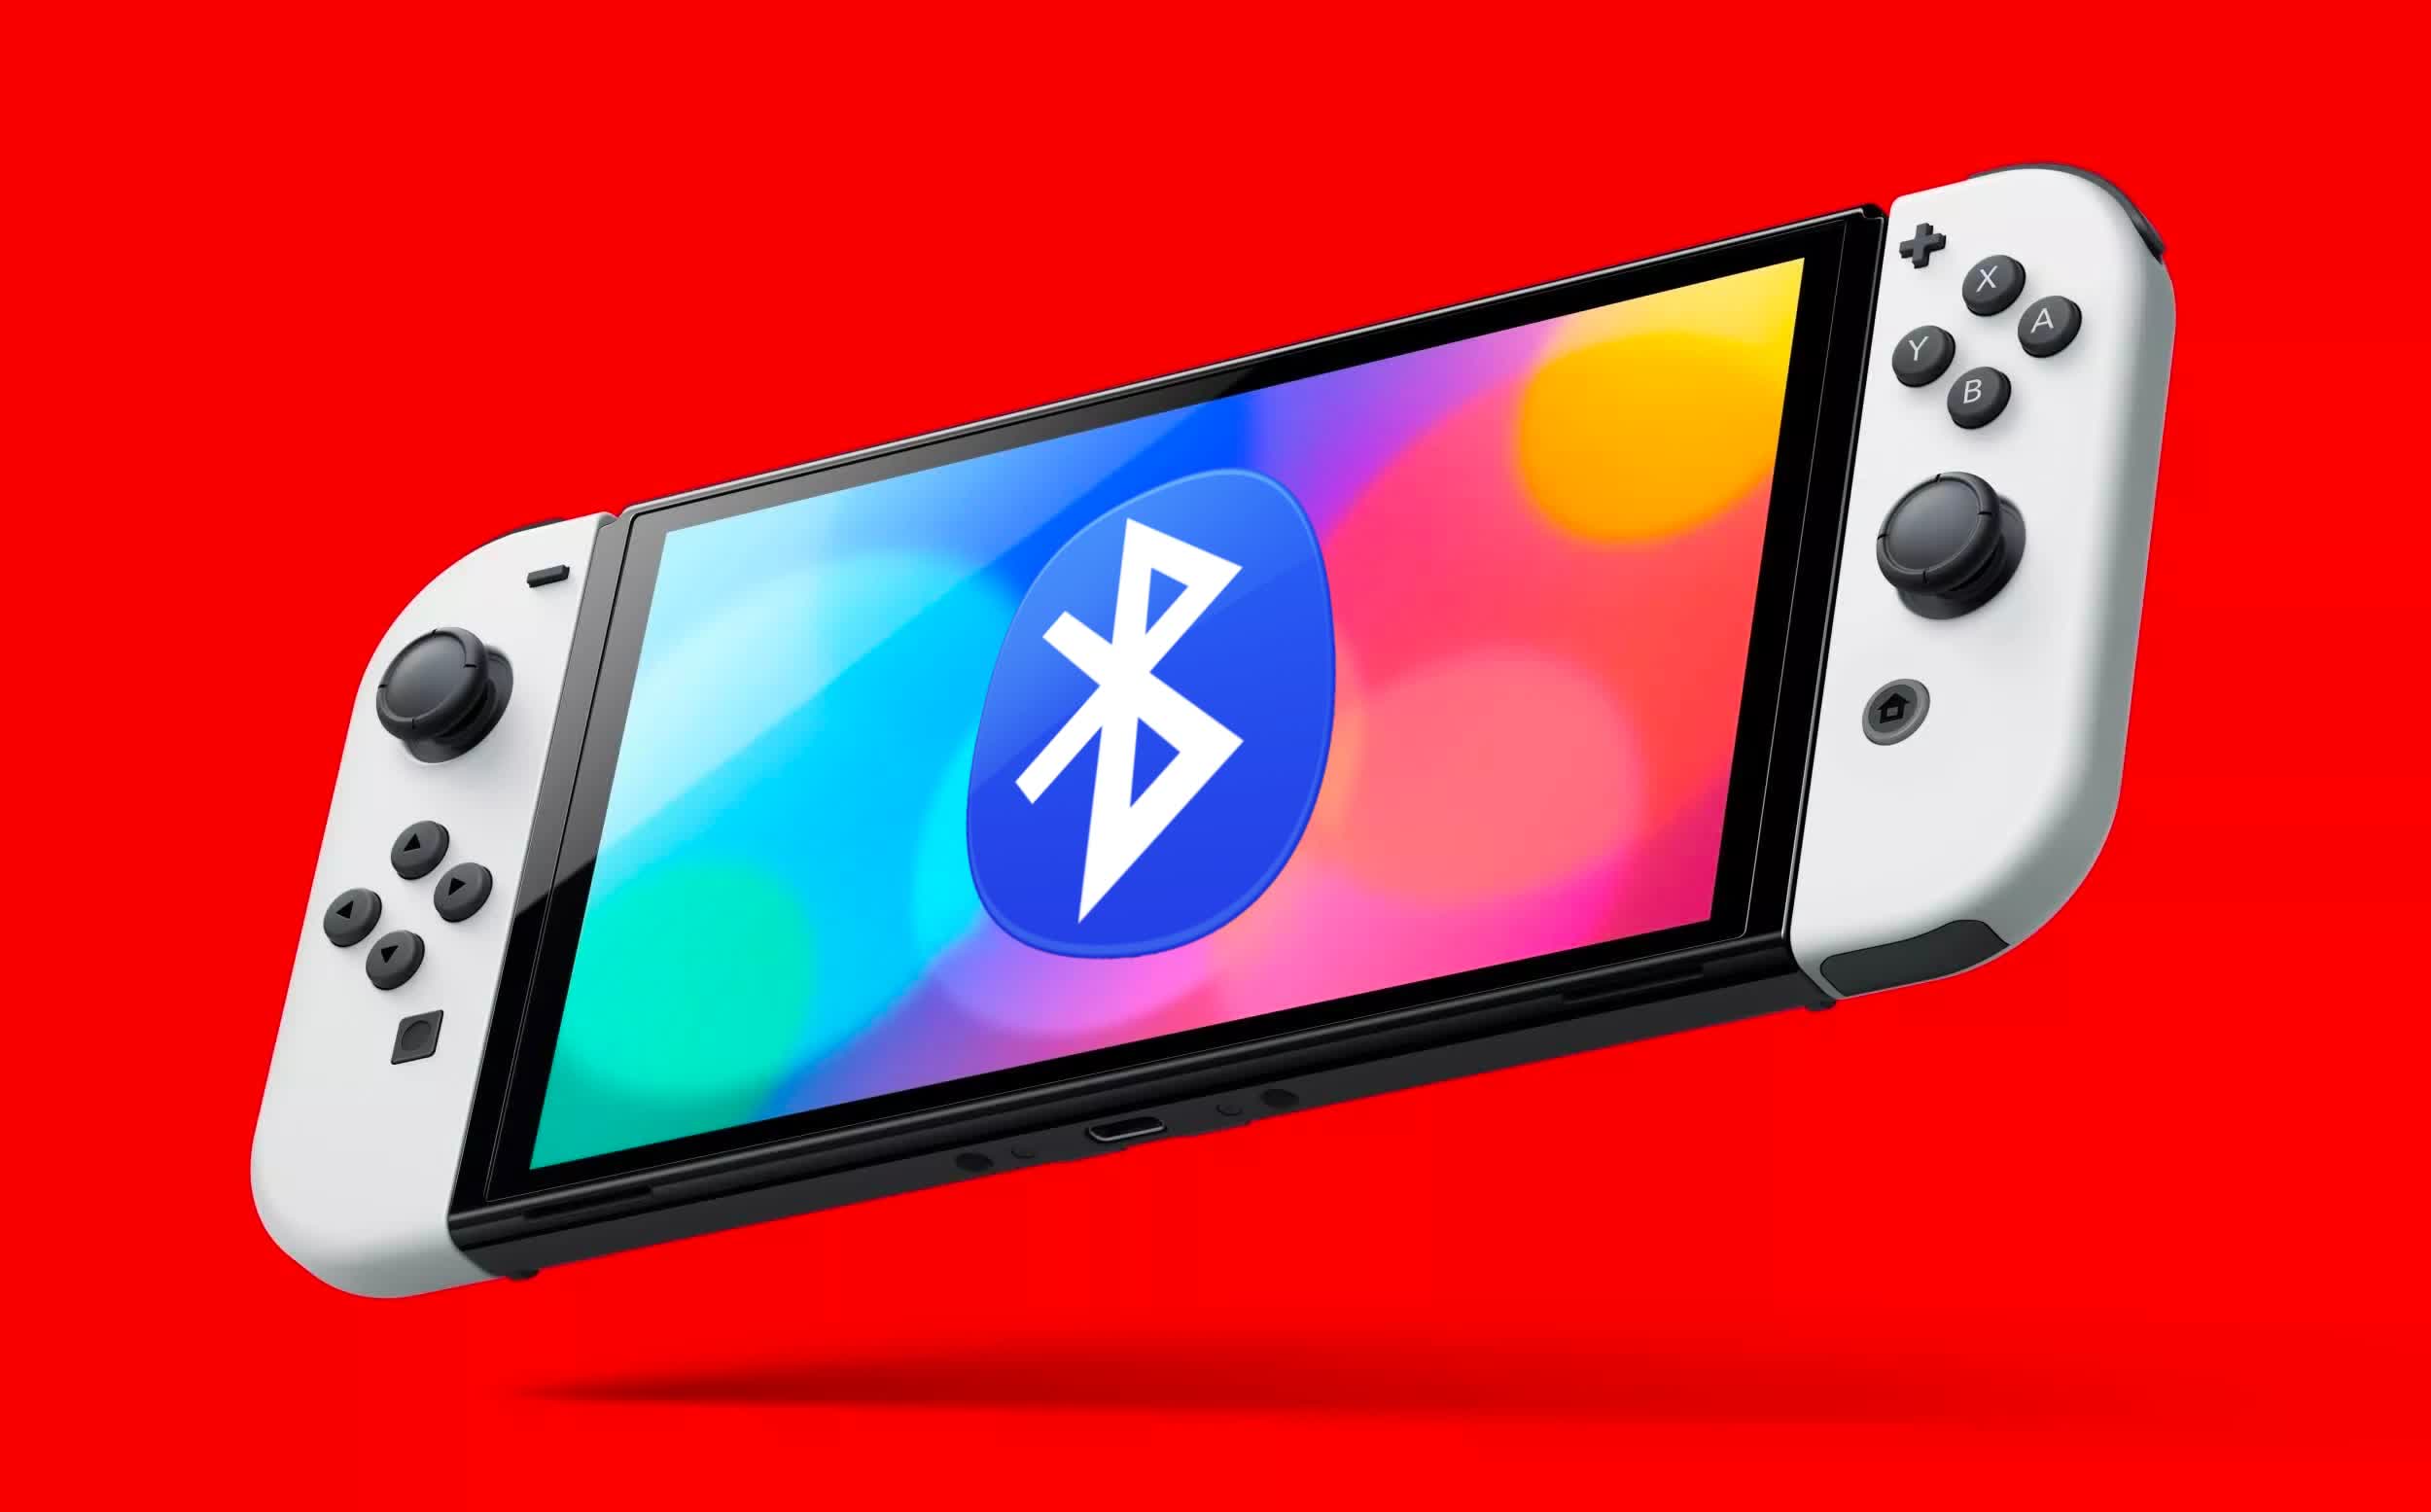 In a surprise announcement, Nintendo finally adds Bluetooth audio to the Switch